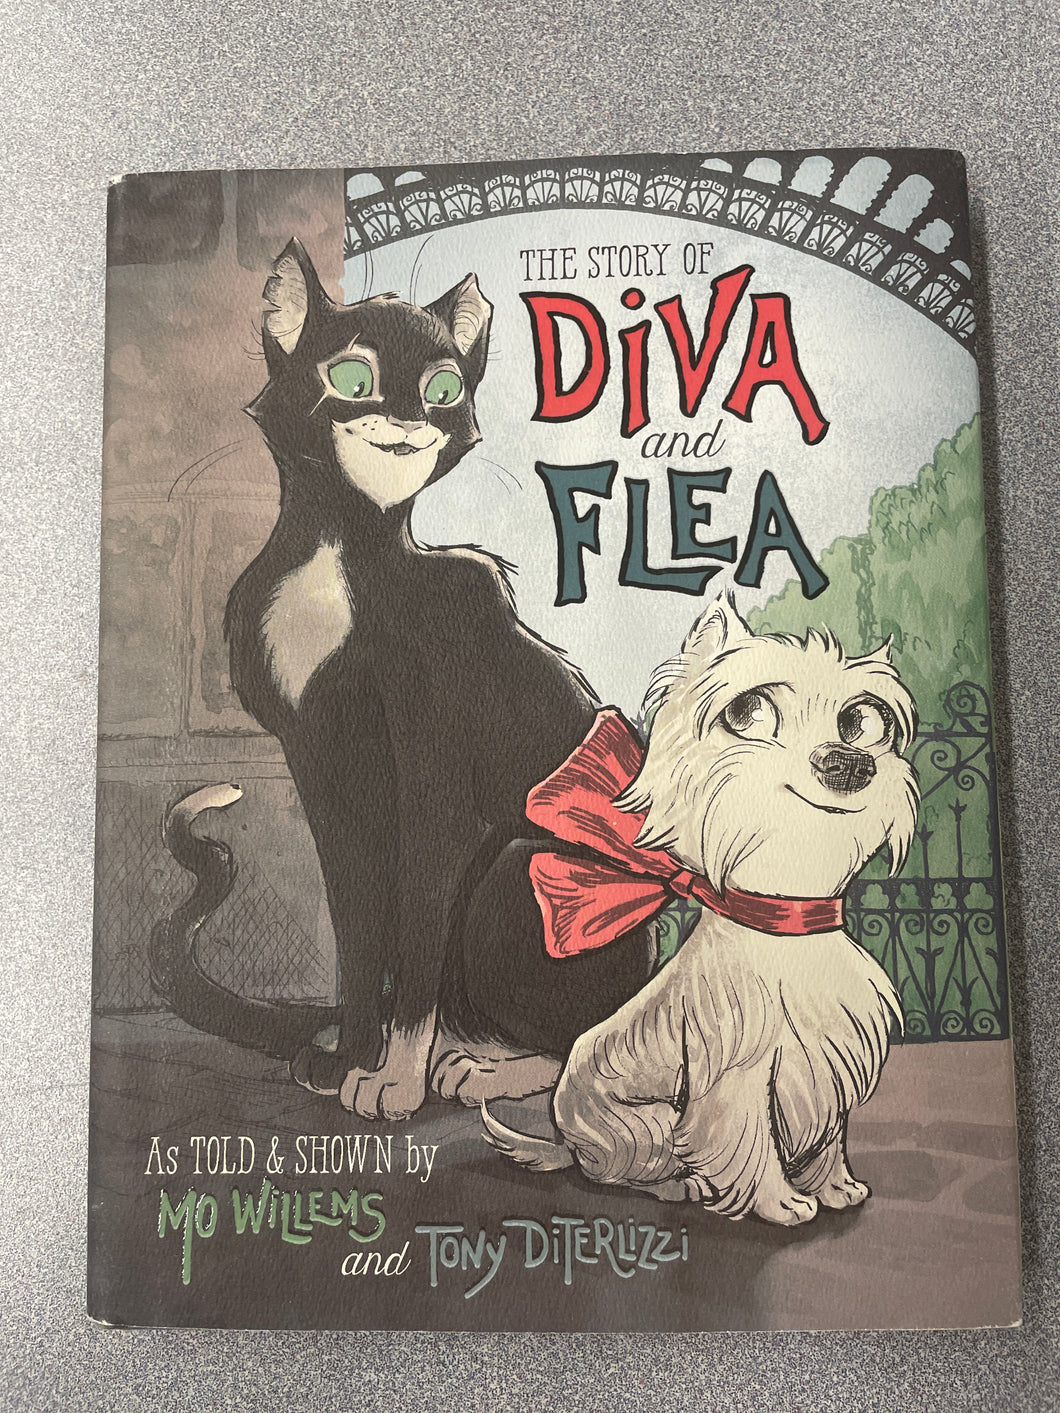 Willems, Mo and Tony Diterlizzi, The Story of Diva and Flea [2015] YF 4/24